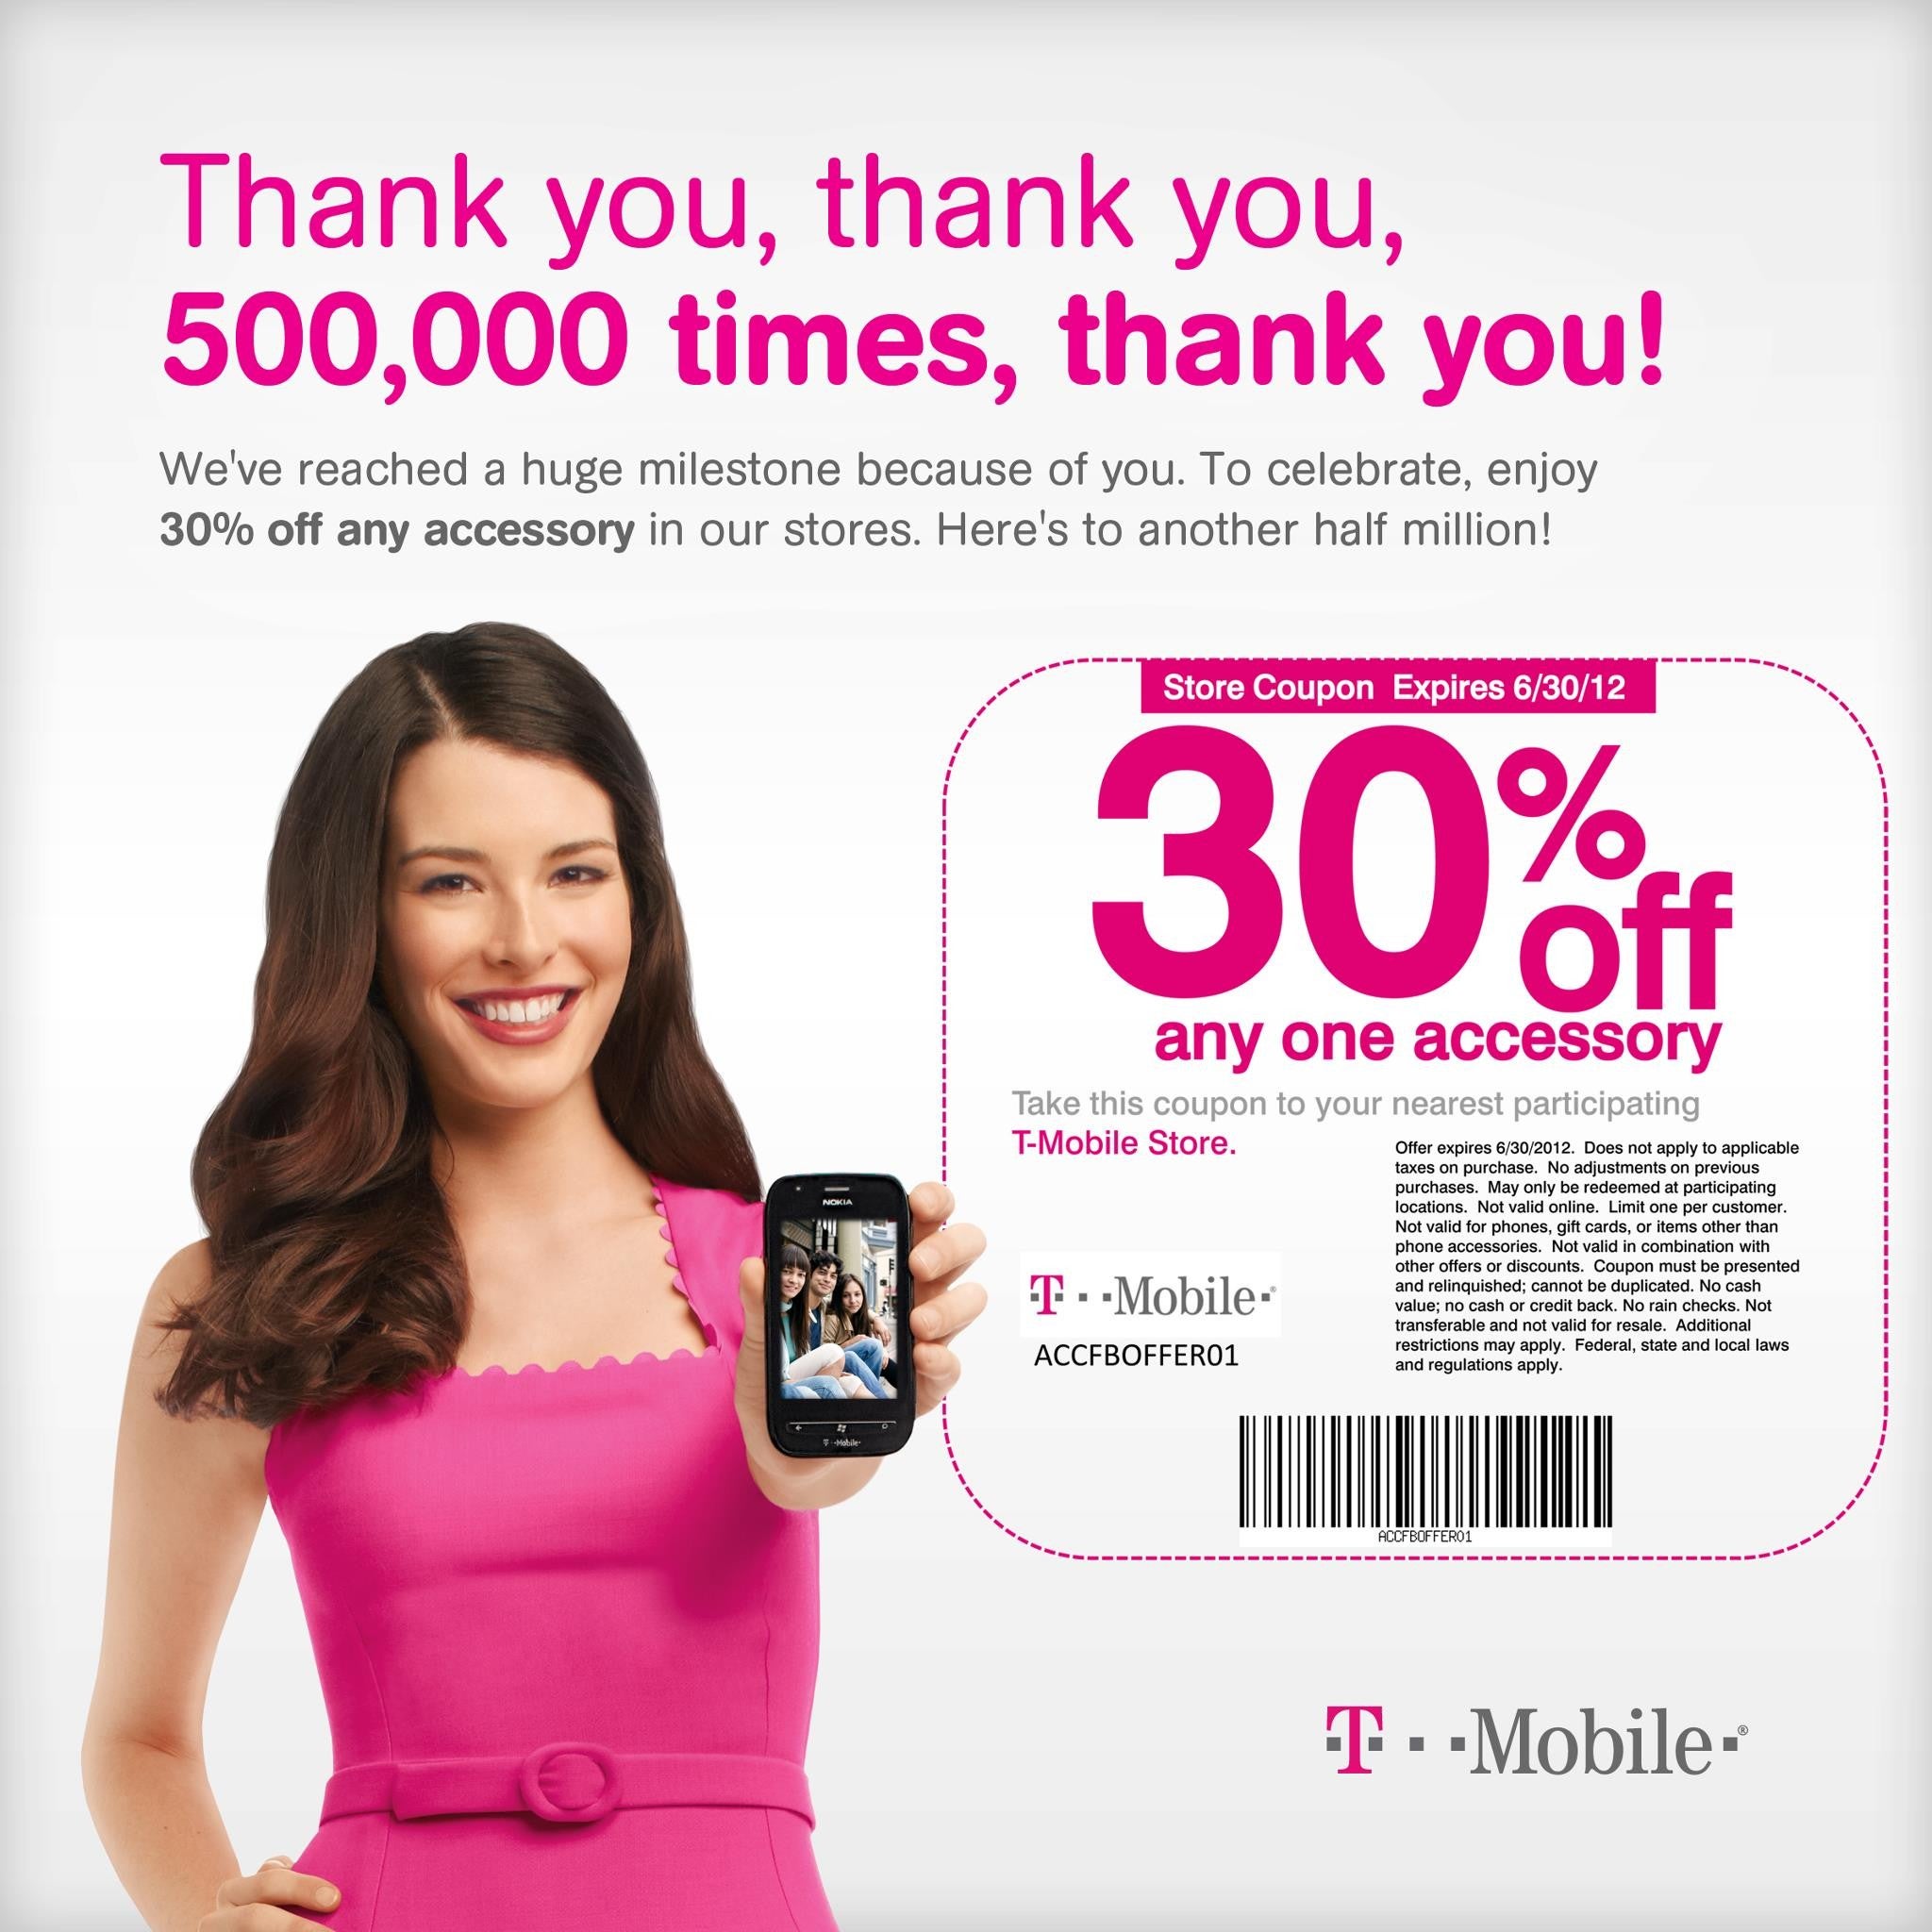 T-Mobile giving 30% off an accessory in honor of 500,000 Facebook fans